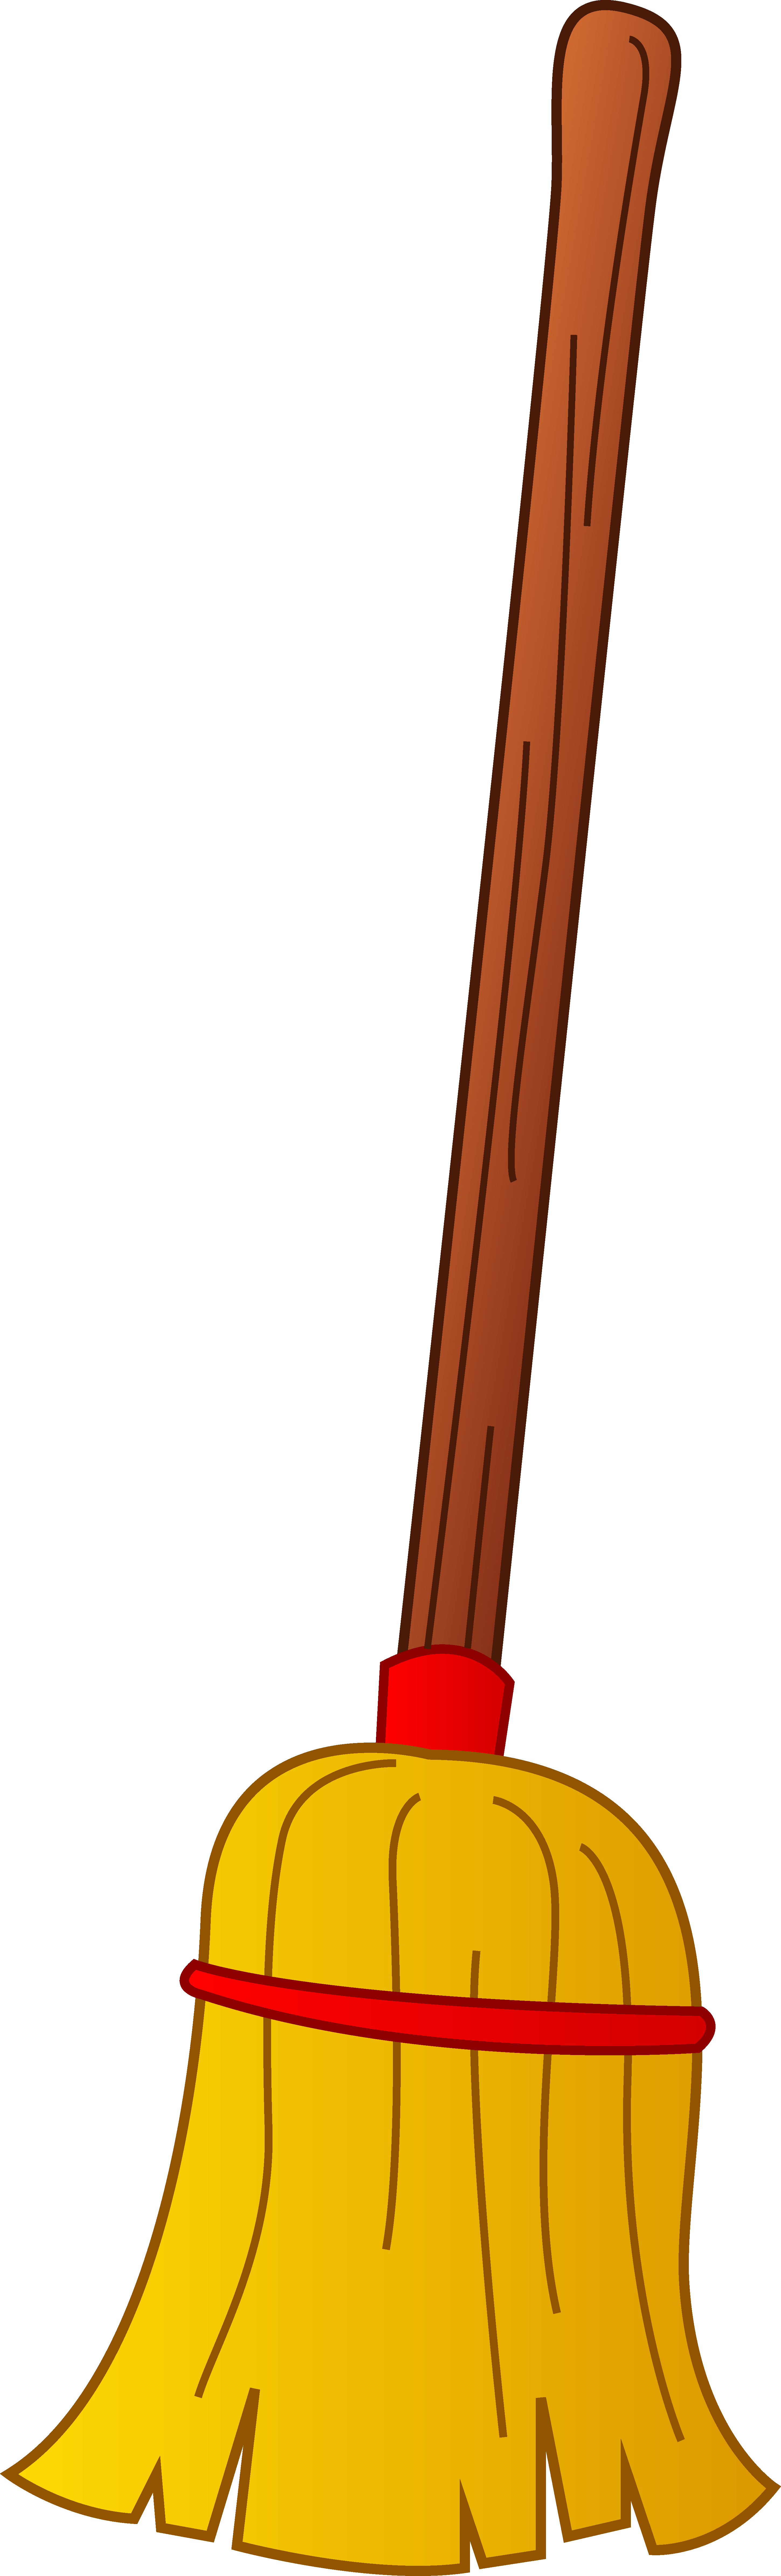 Free hypothermia thermometer cliparts. Witch clipart broom